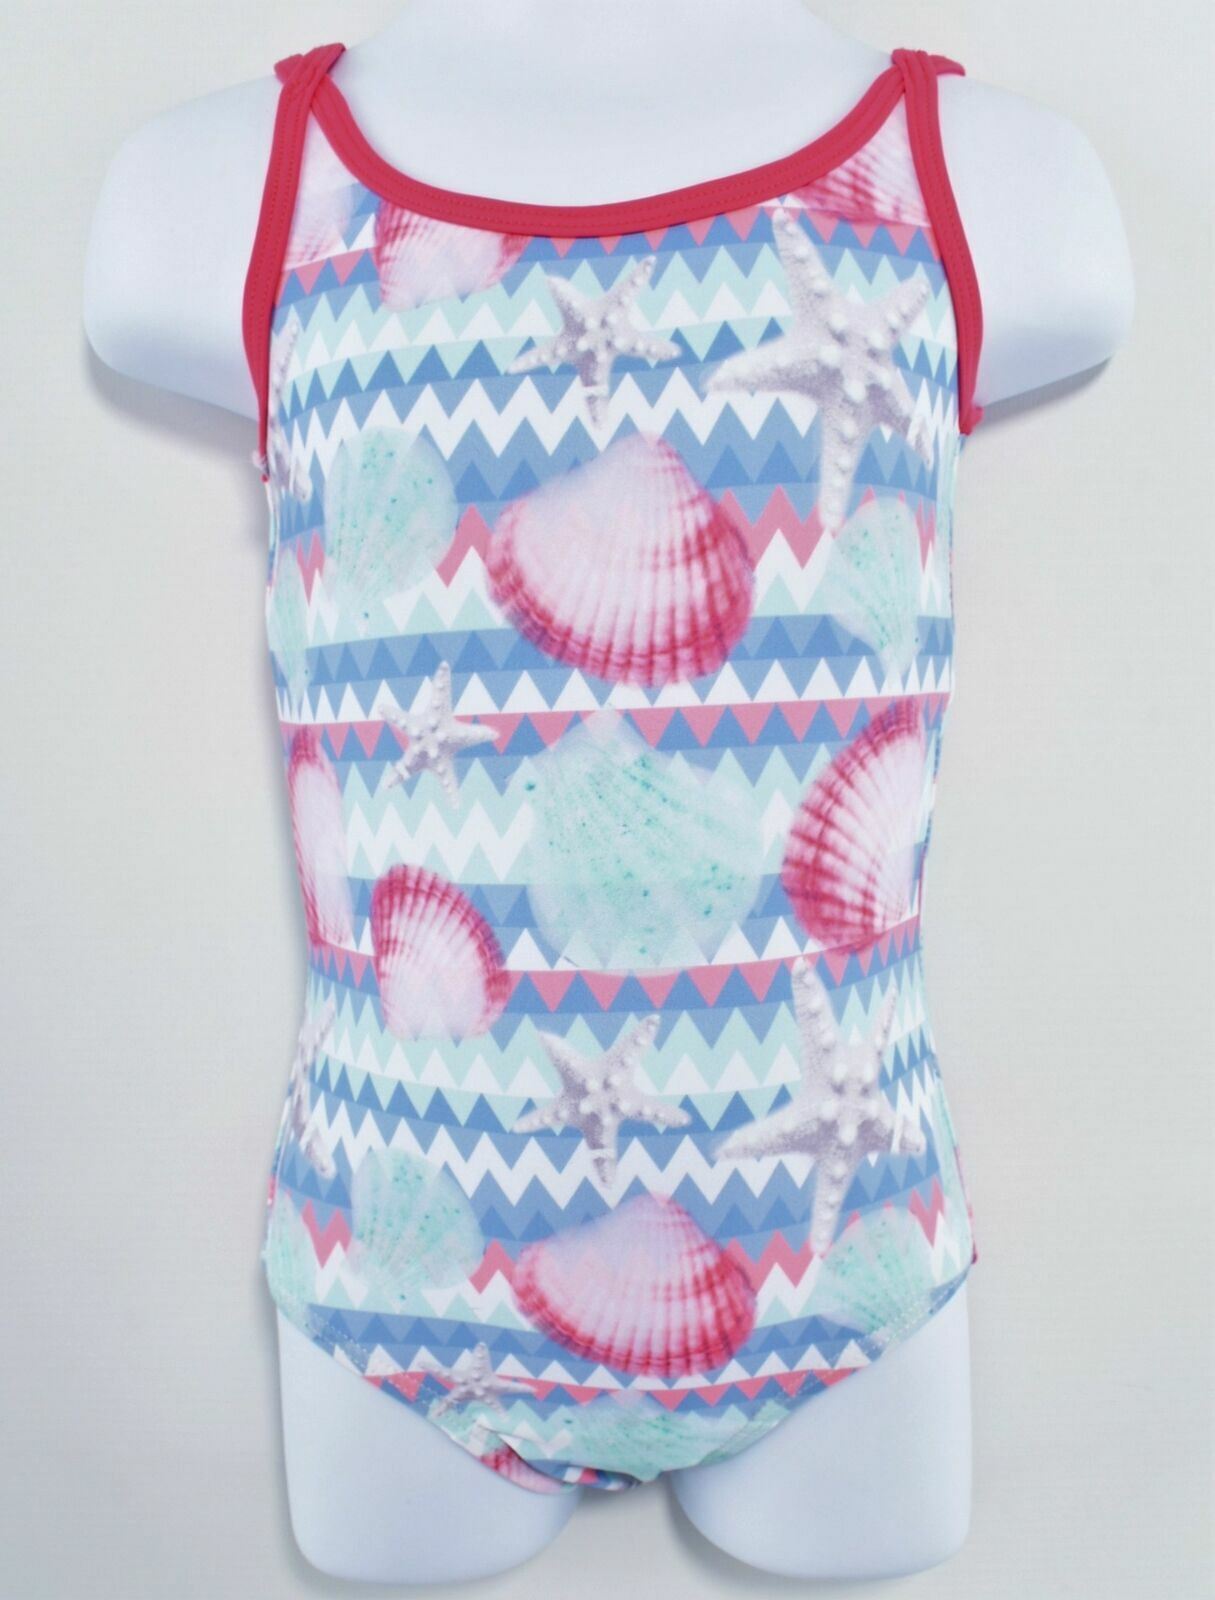 LENTIGGINI Girls Multicolored ZigZag One Piece Swimsuit- age 2 years to 3 years